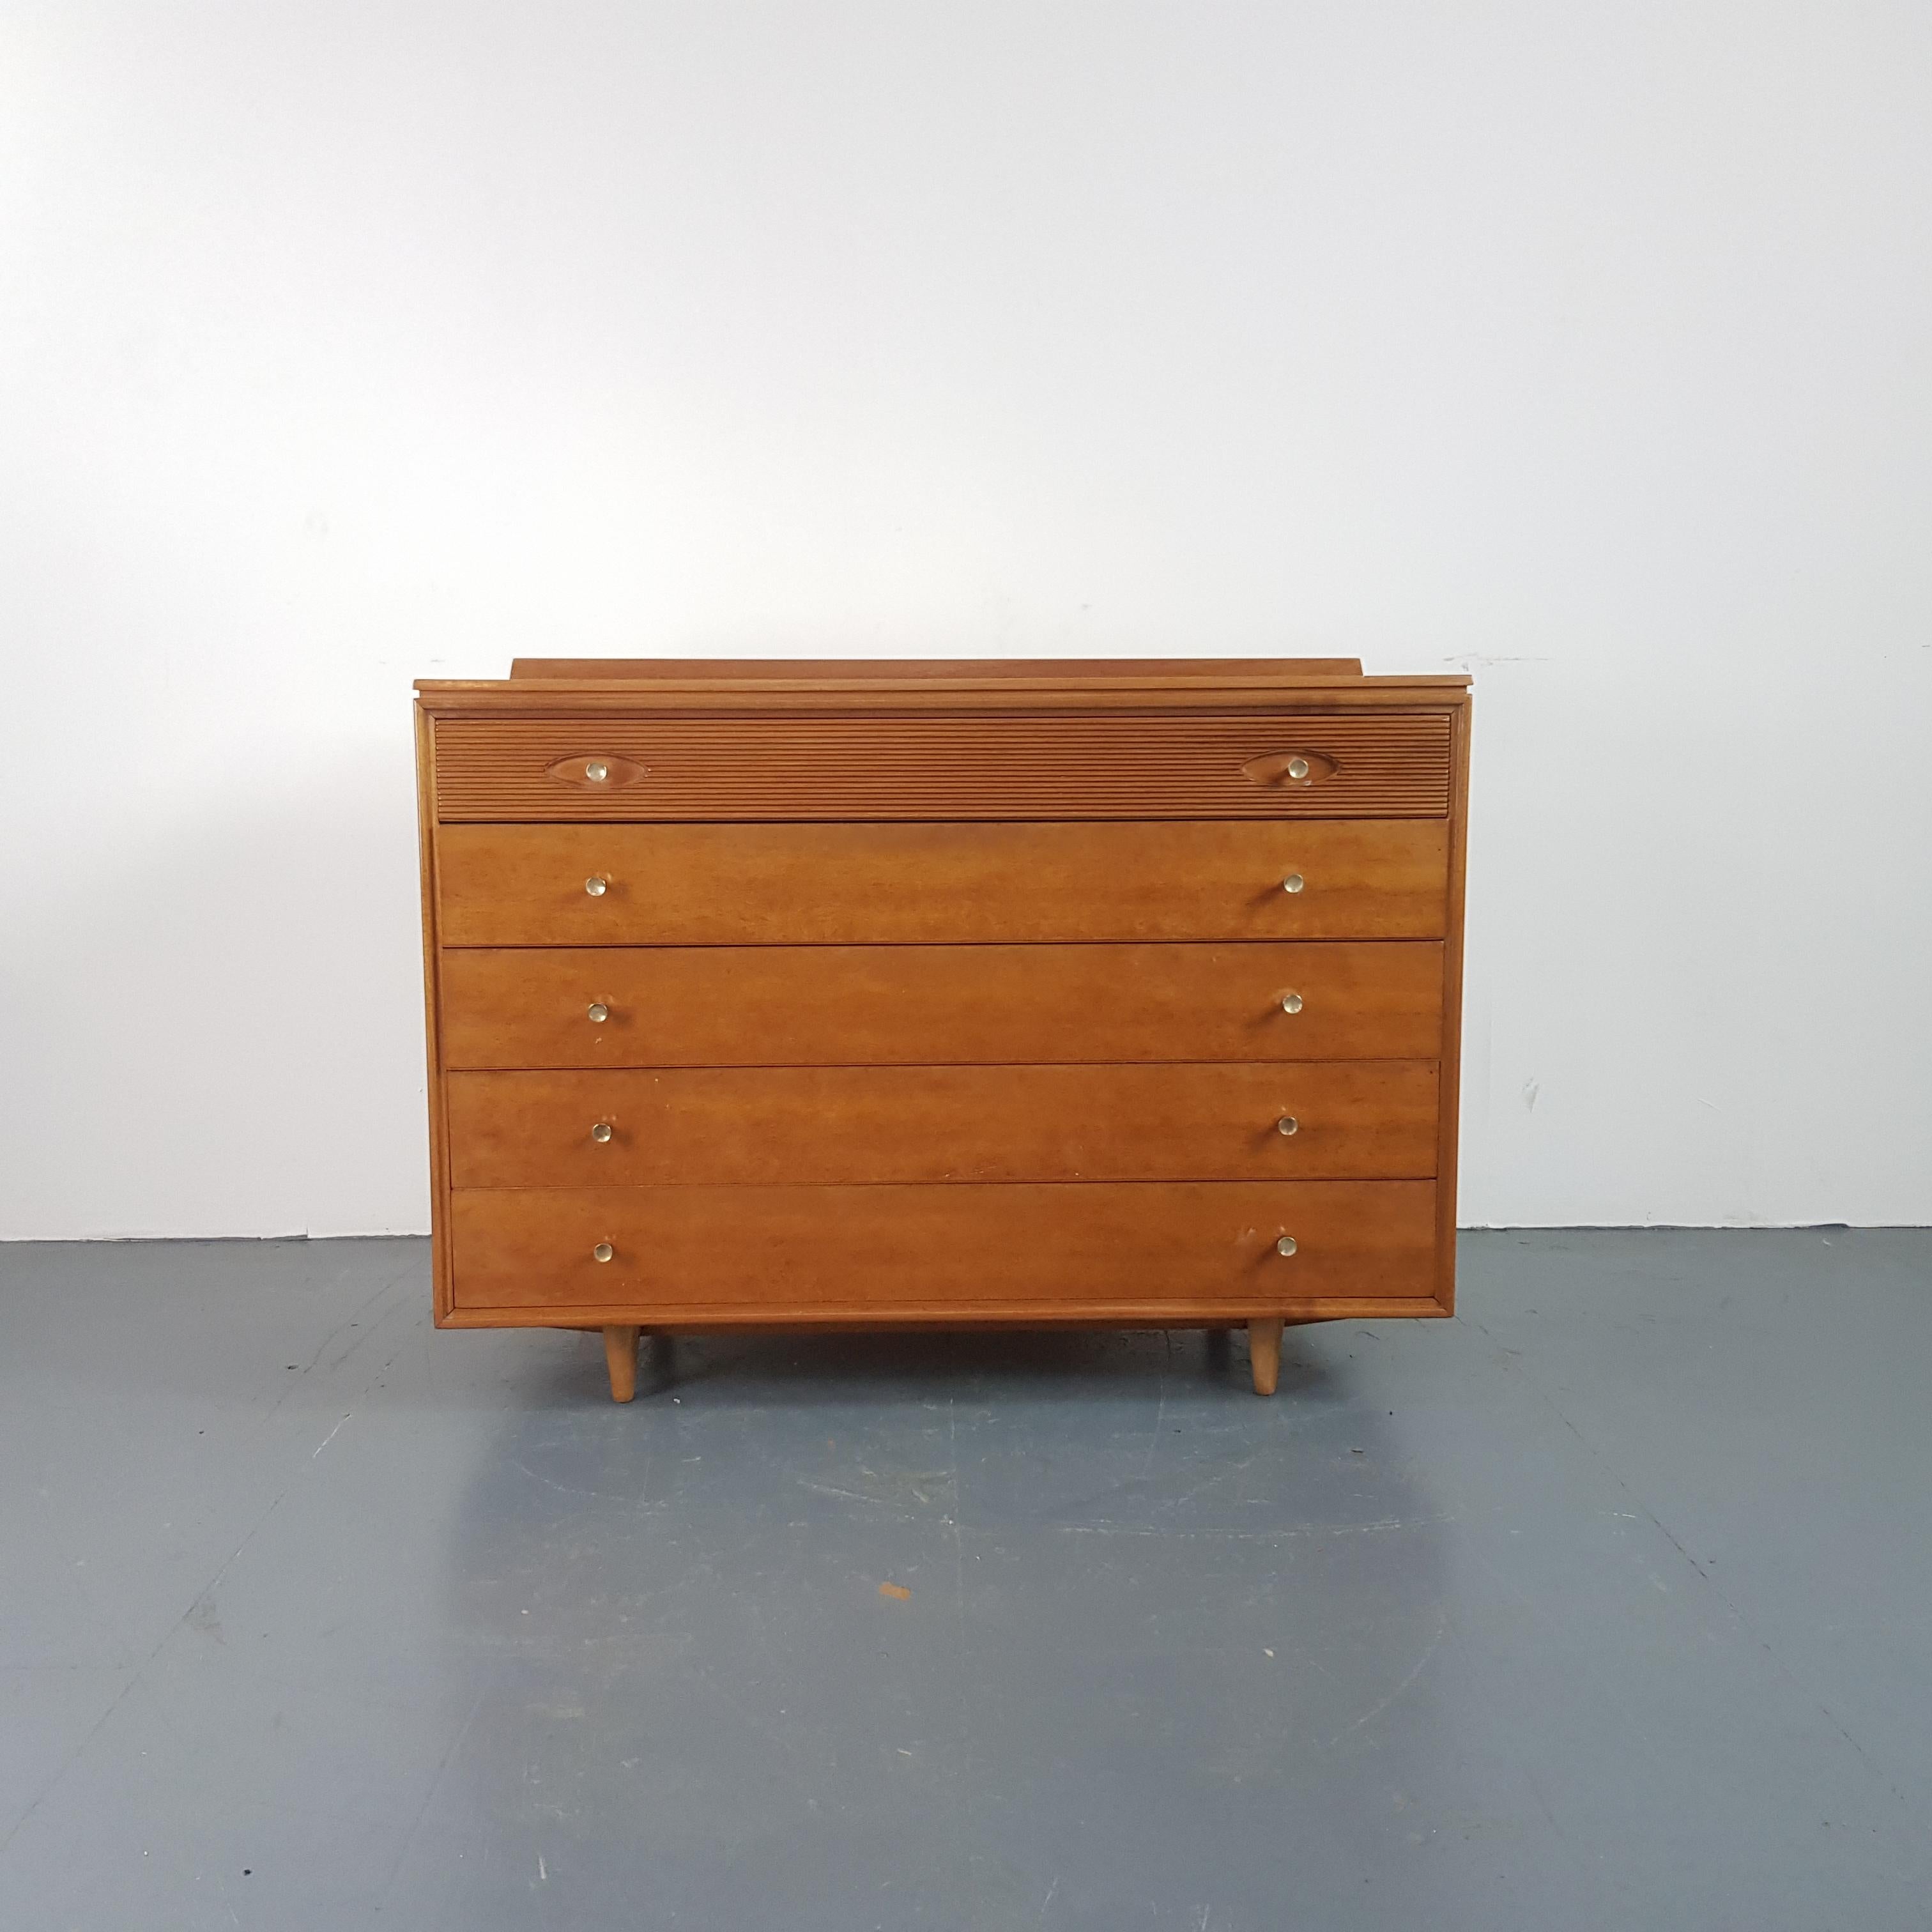 Lovely midcentury chest of drawers made from teak, designed by Robert Heritage for Archie Shine. With signature reeded drawer fronts.

Approximate dimensions:

Width: 99cm

Depth: 47cm

Height: 75cm.

Drawers:

94 x 35 x 8cm (top)

94